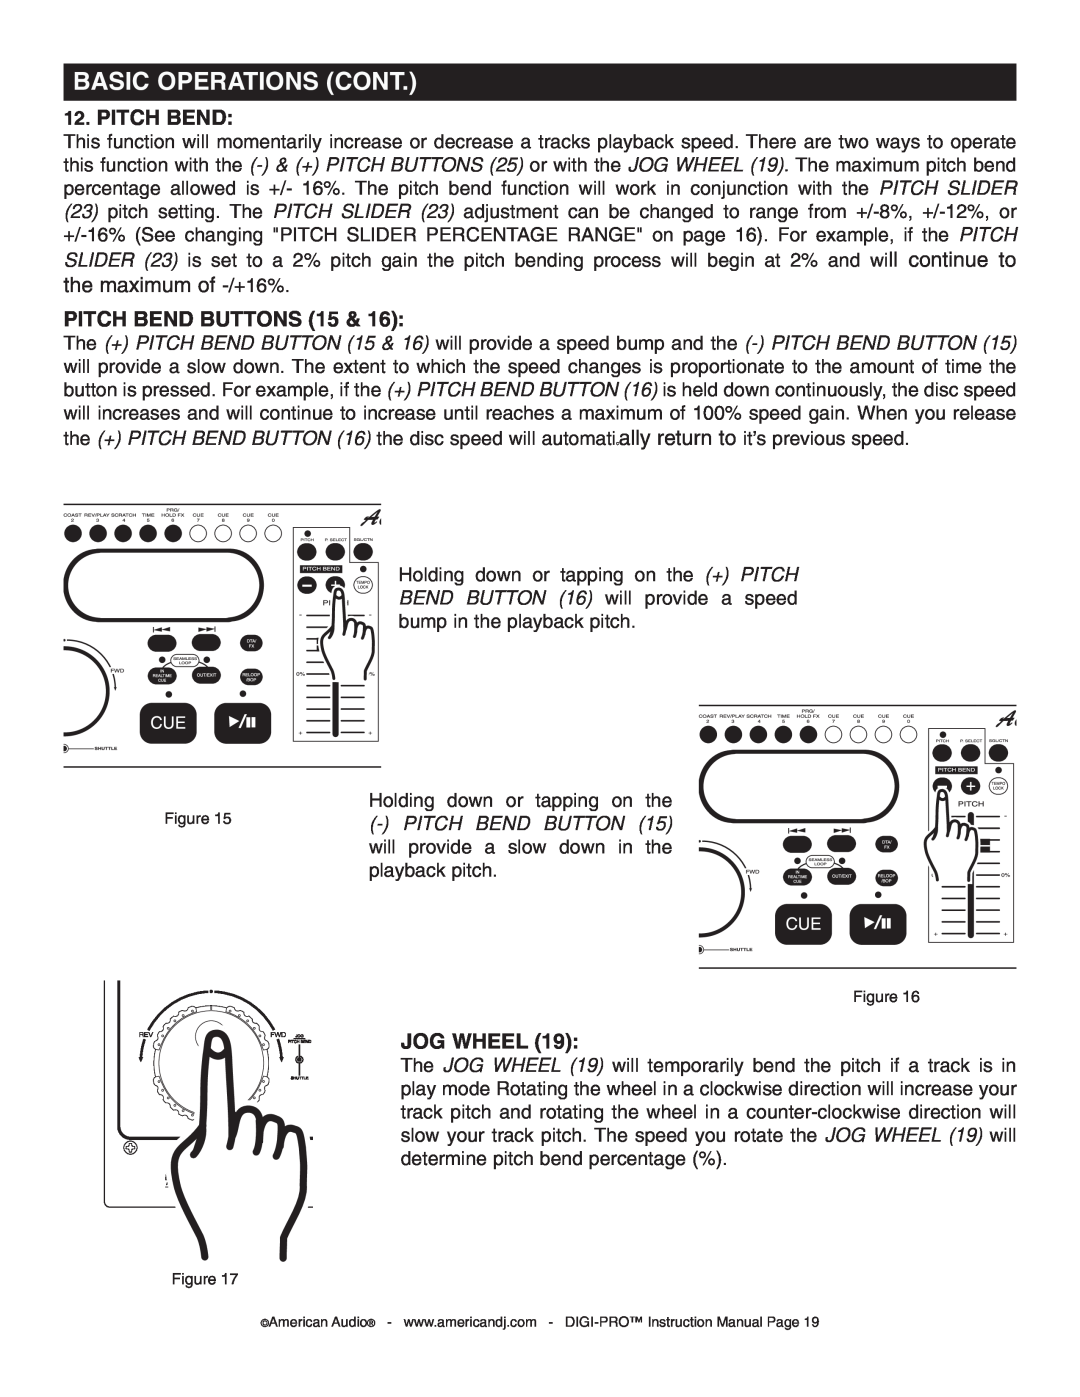 American Audio DIGI-PRO operating instructions Pitch Bend Buttons, Jog Wheel, Basic Operations Cont 